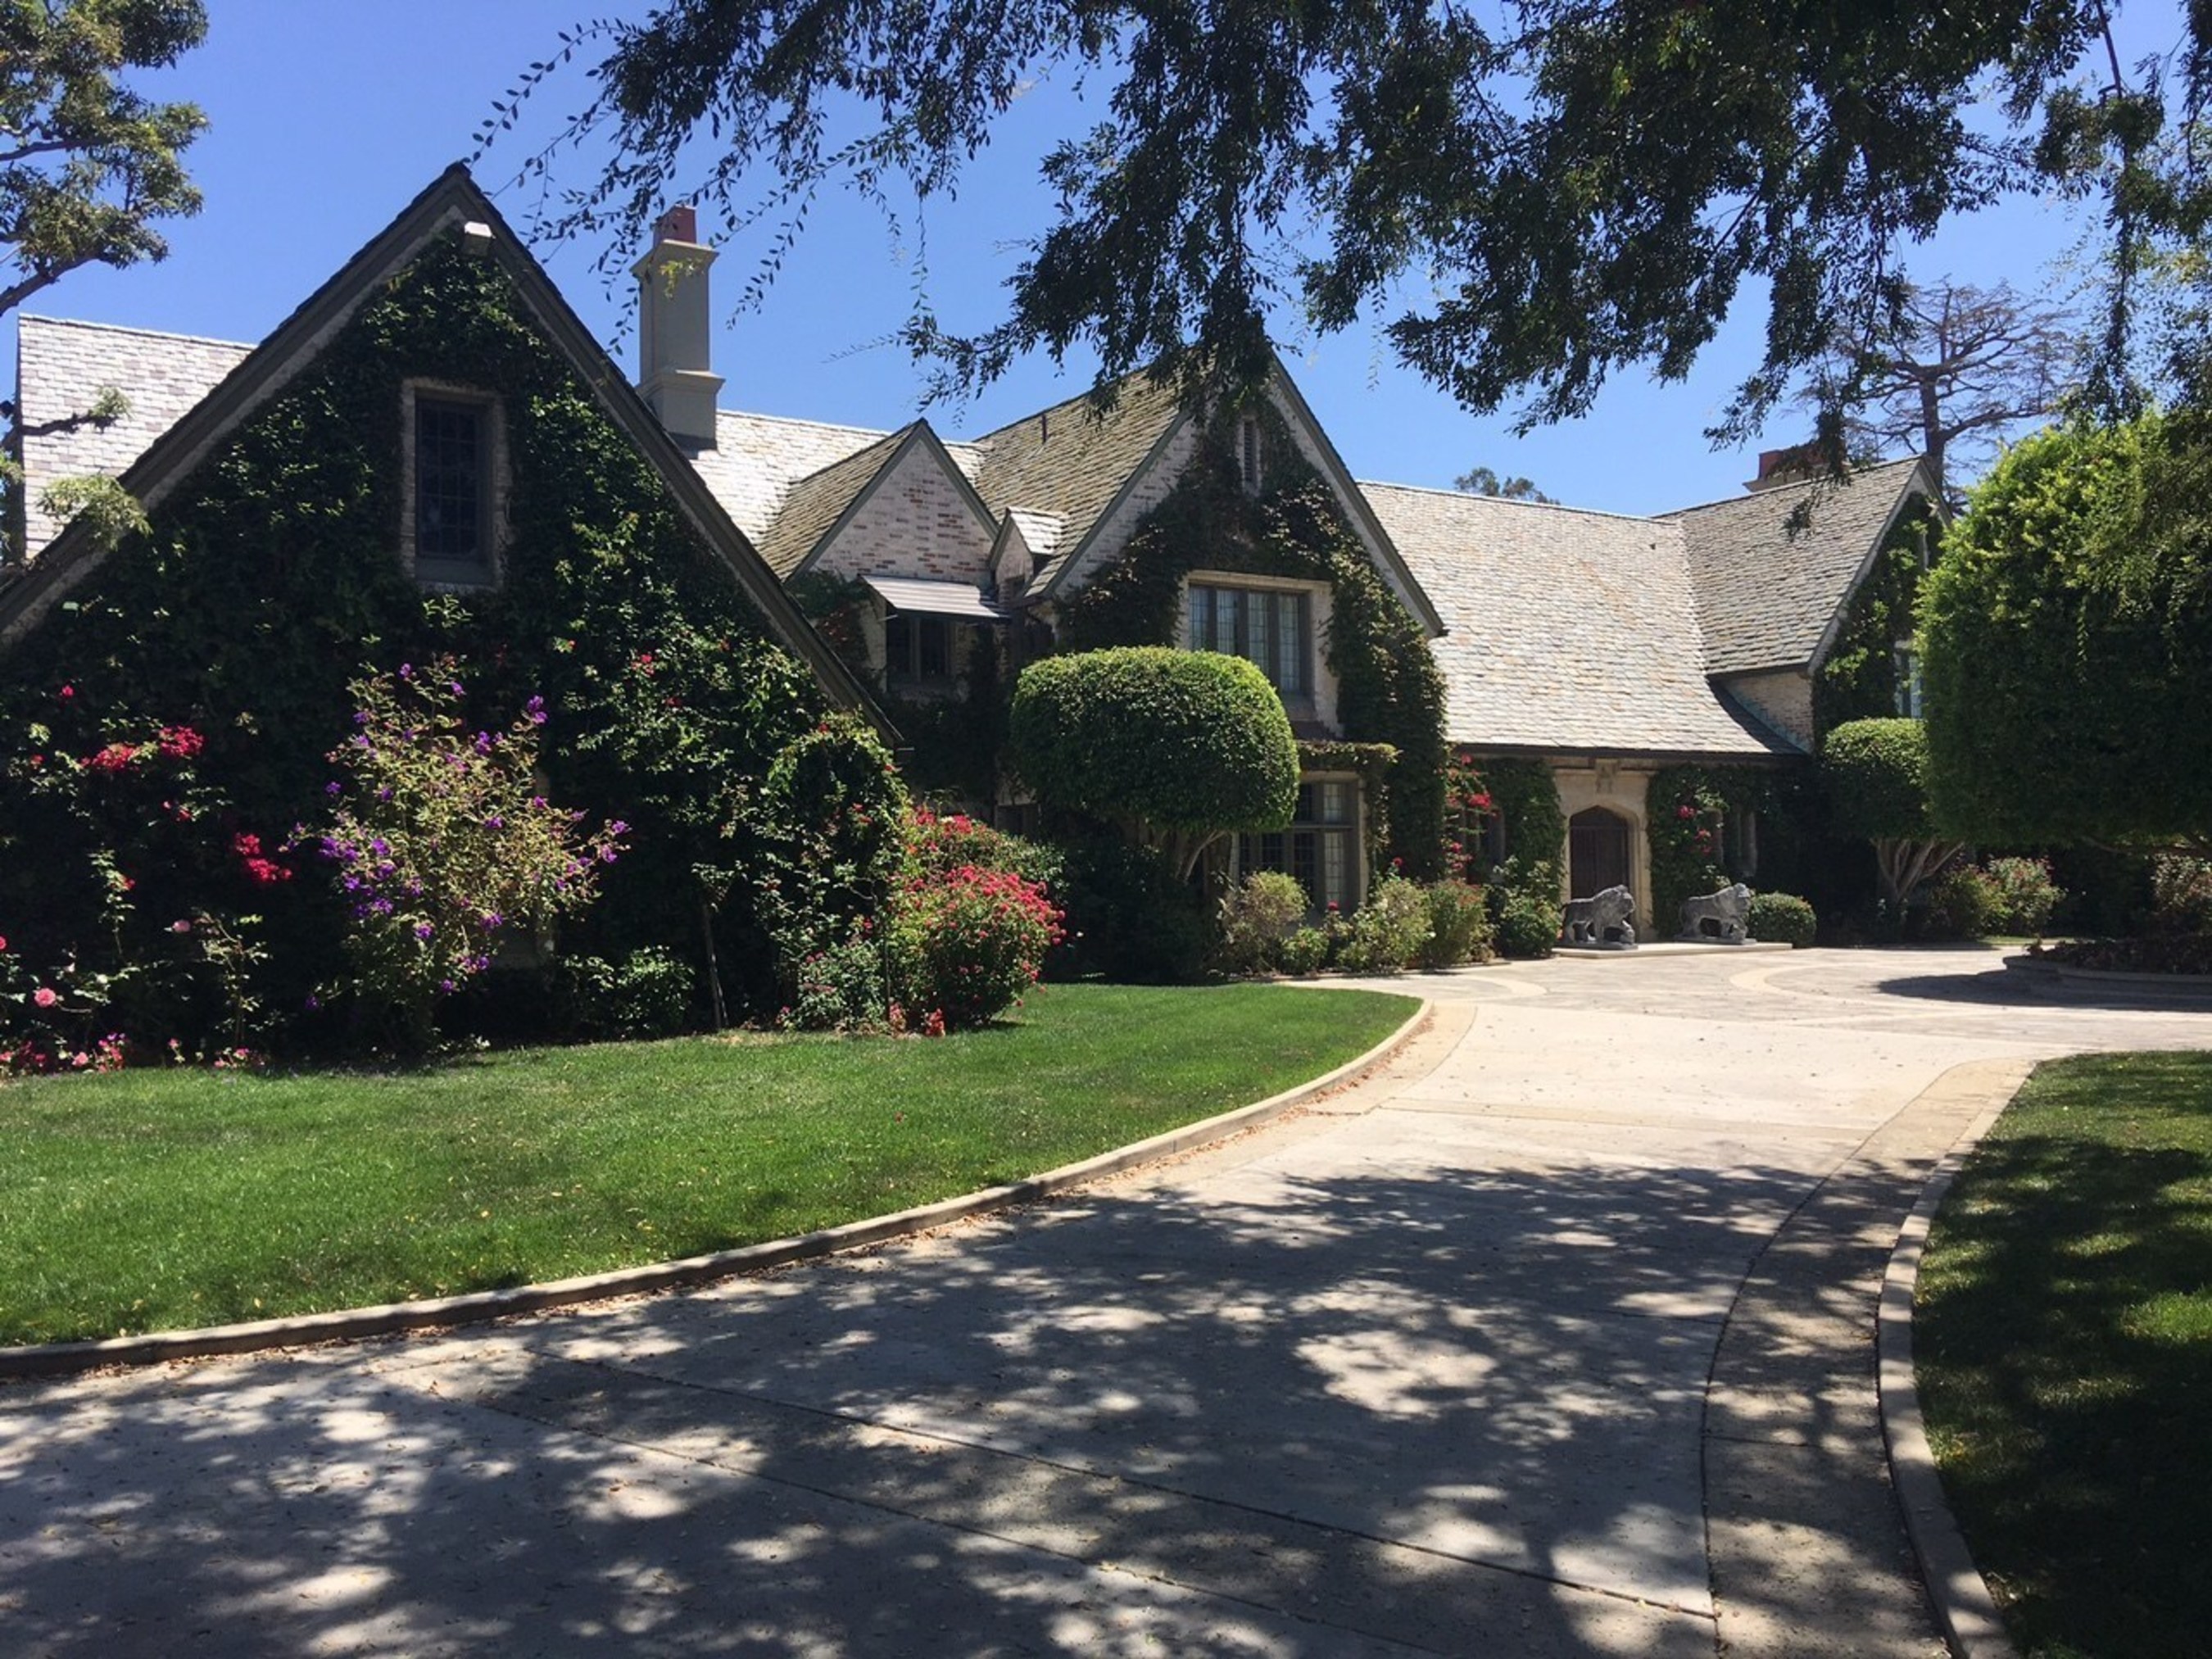 The Playboy Mansion sister house, home of Daren Metropoulos since 2009. He purchased the Playboy Mansion in August of 2016 and intends to eventually reconnect the two estates on the 7.3 acre compound.